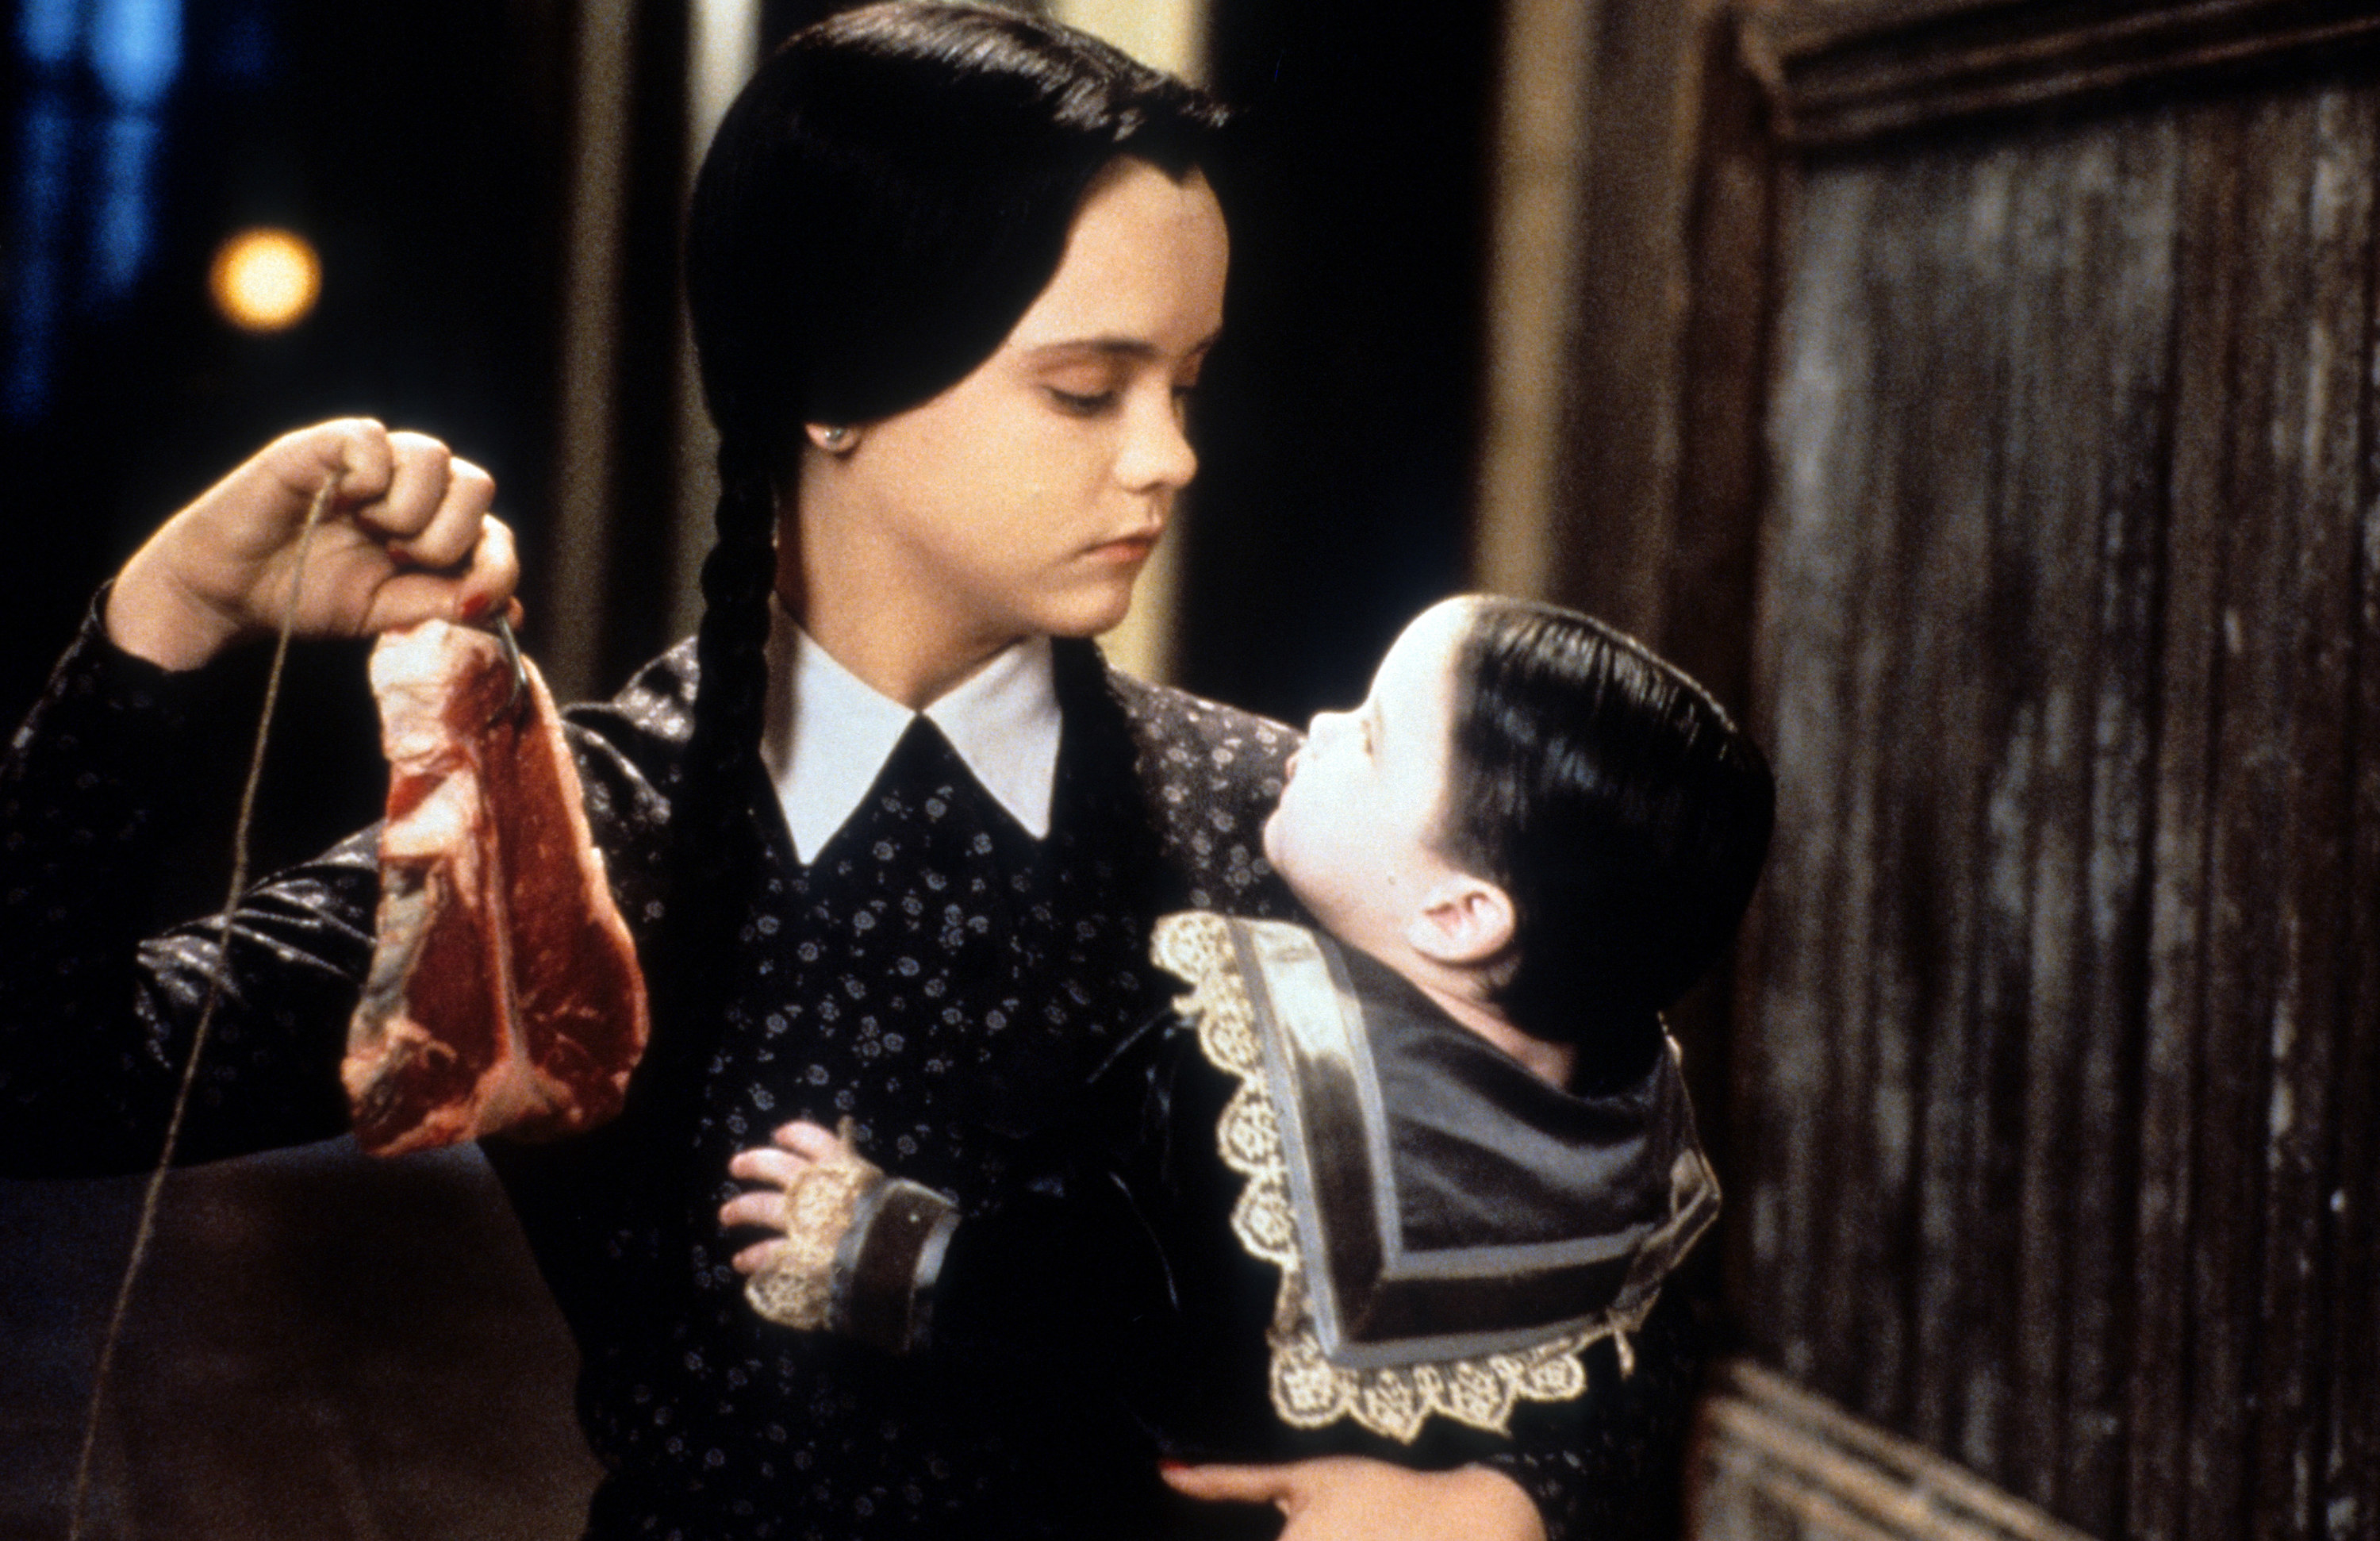 Christina Ricci dangling meat in a scene from the film &#x27;Addams Family Values&#x27;, 1993